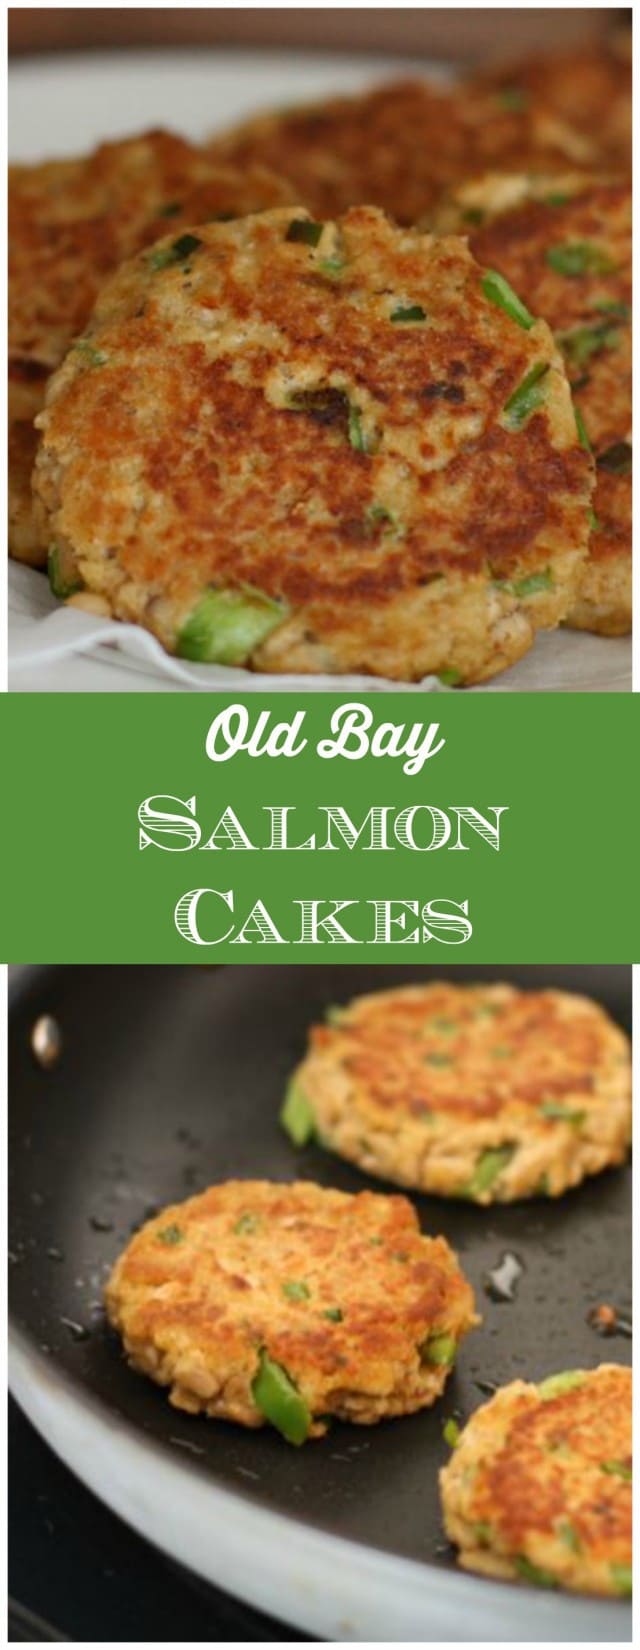 A classic and easy recipe for salmon cakes that comes together in minutes. Serve these salmon cakes with lemon and a green salad for a light and refreshing dinner.